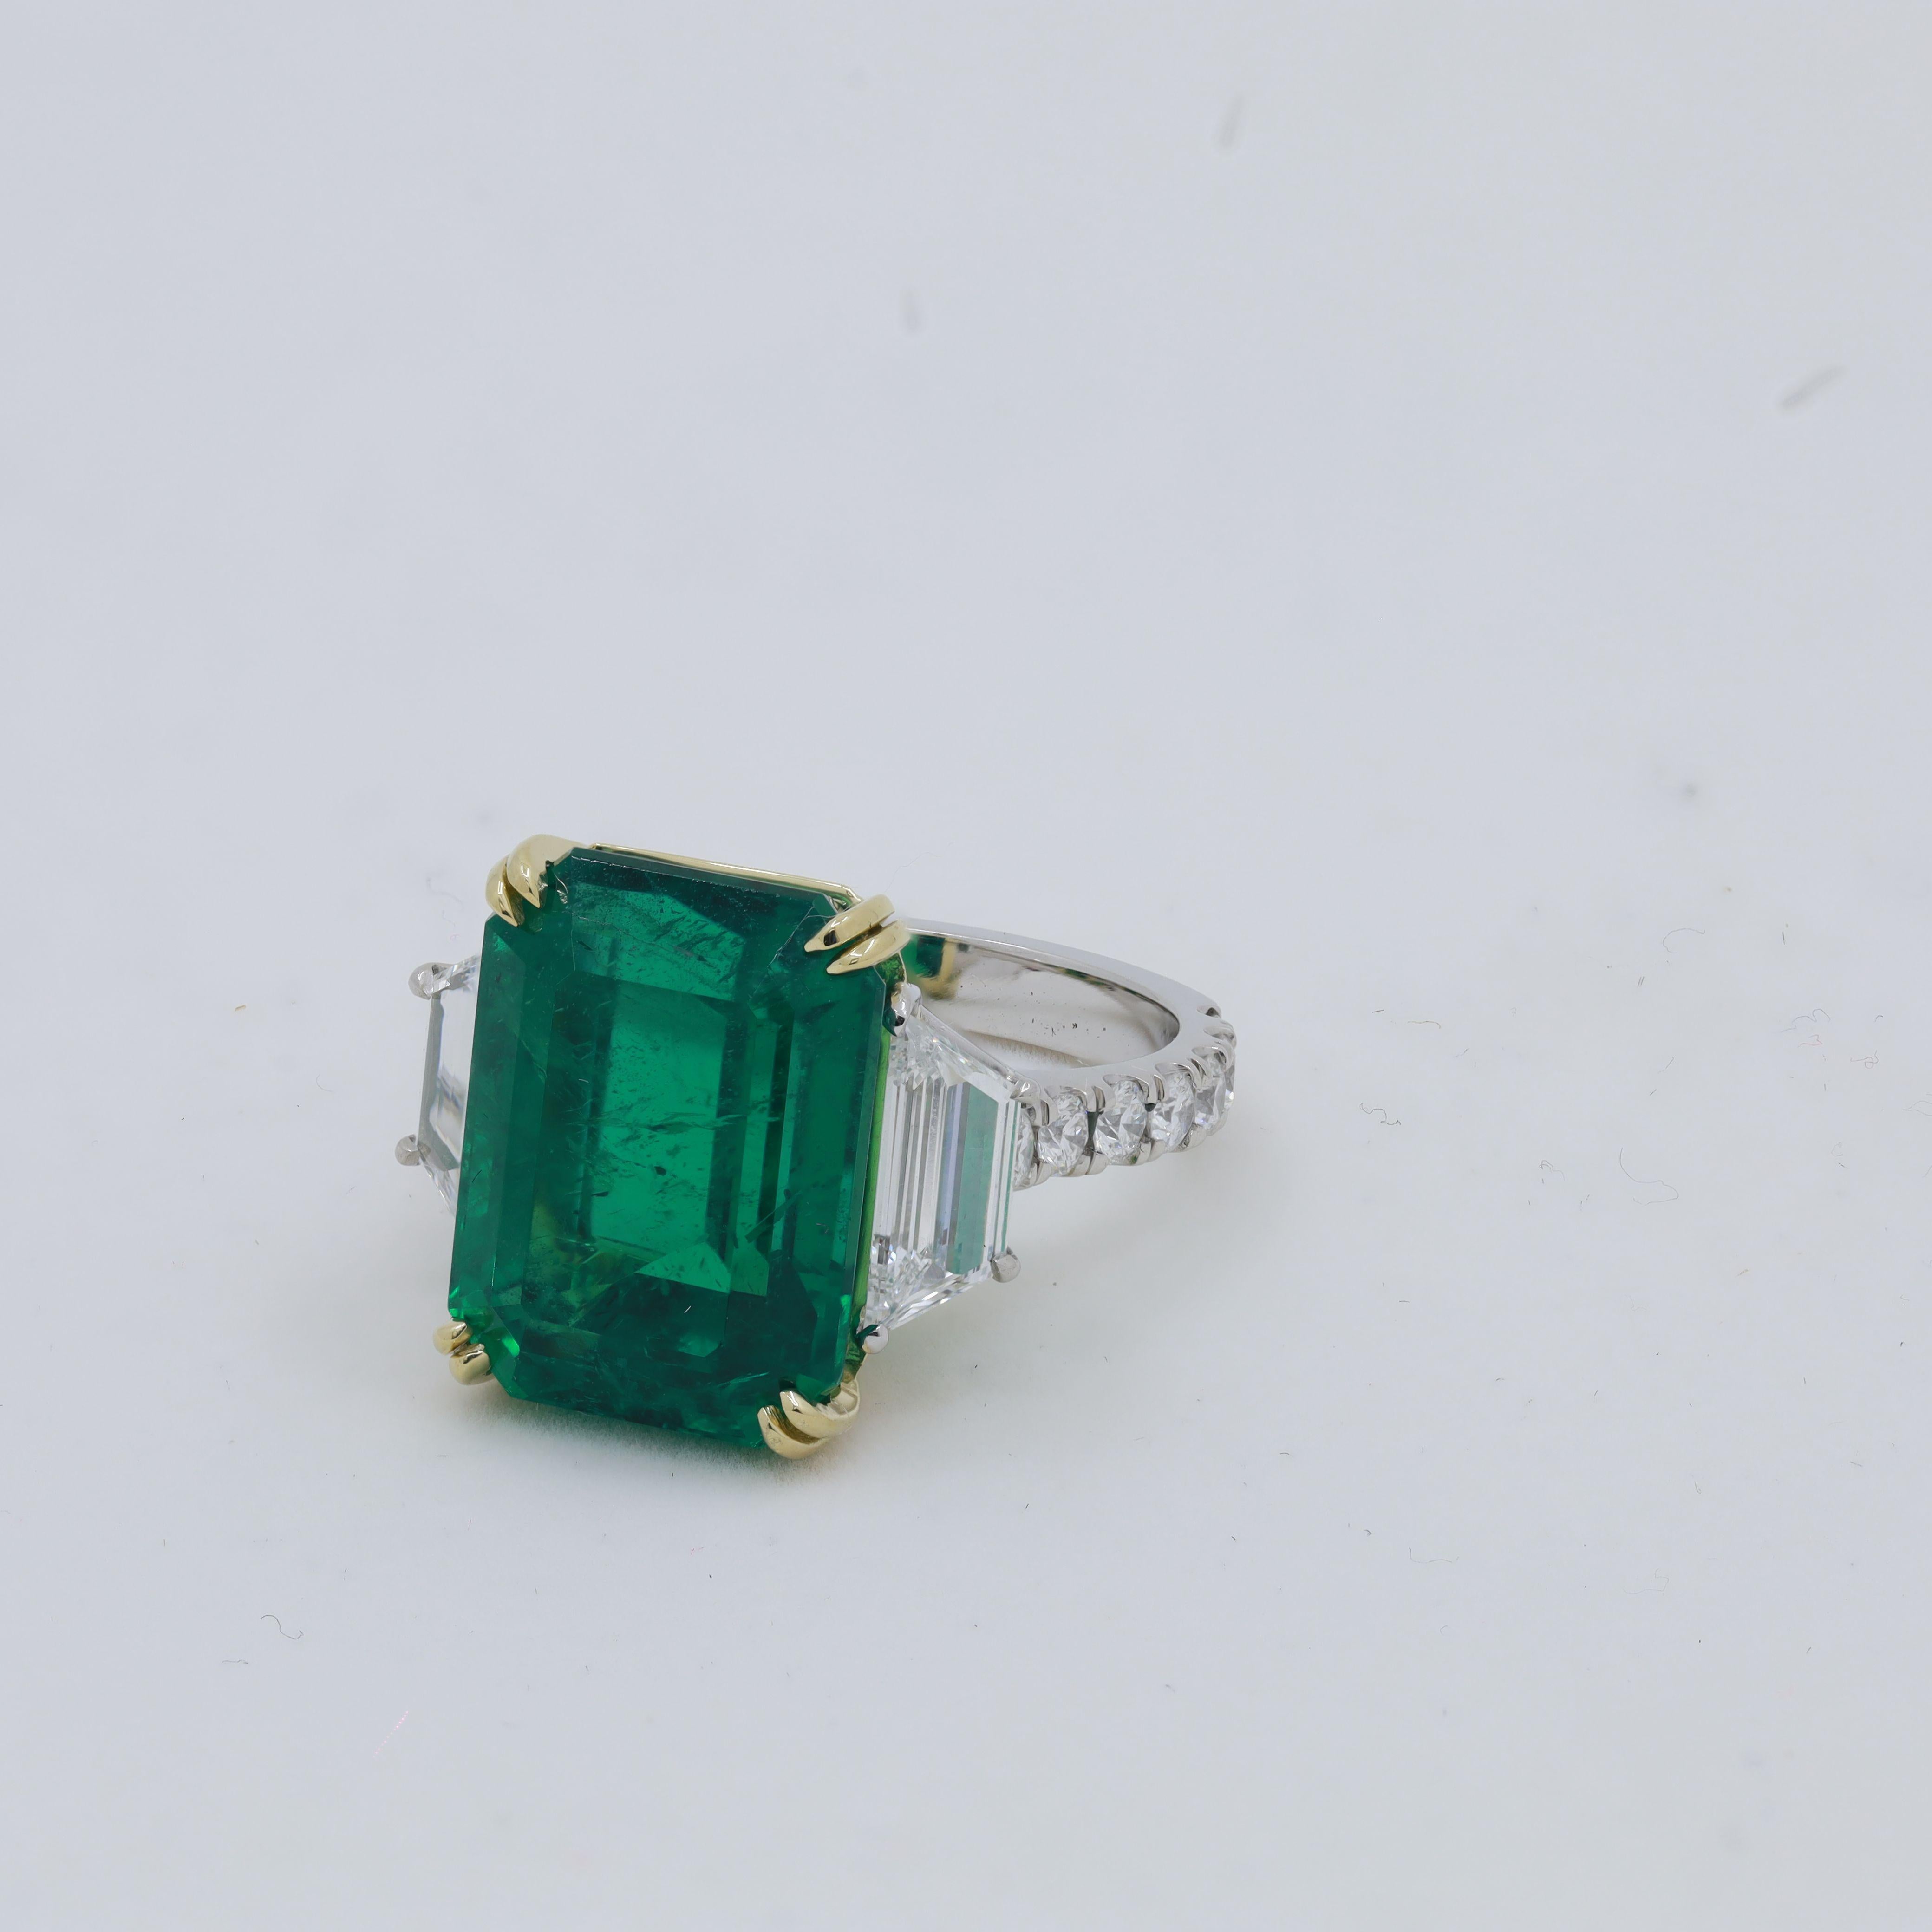 Emerald Cut Diana M. Emerald Diamond ring 12.53ct Emerald with 1.60cts of diamonds Platinum  For Sale